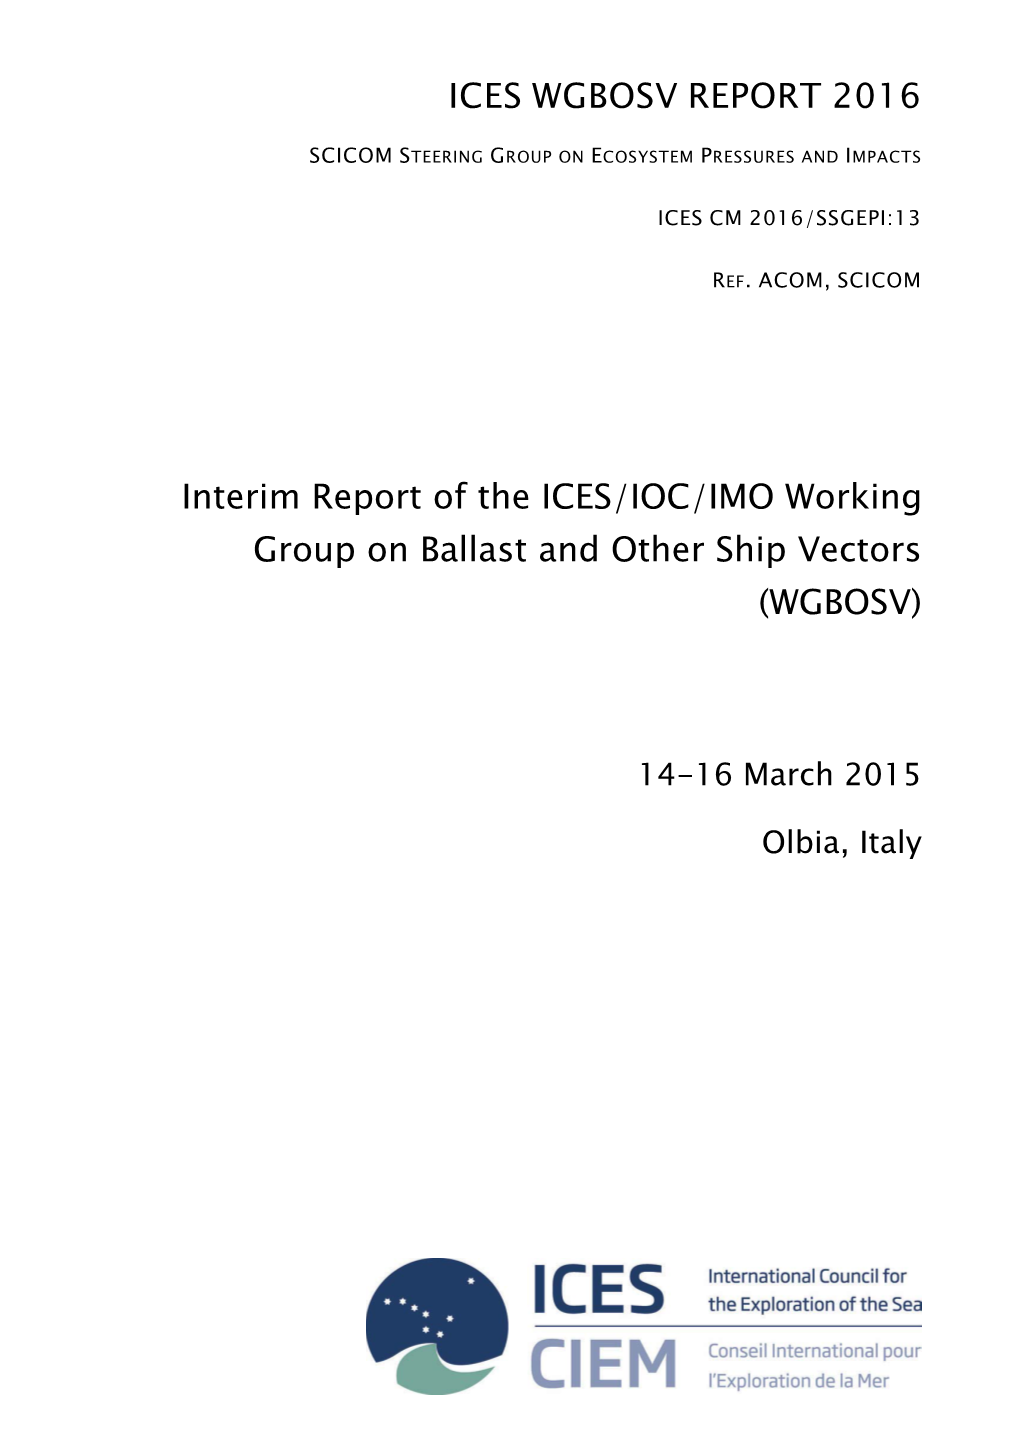 Interim Report of the ICES/IOC/IMO Working Group on Ballast and Other Ship Vectors (WGBOSV)